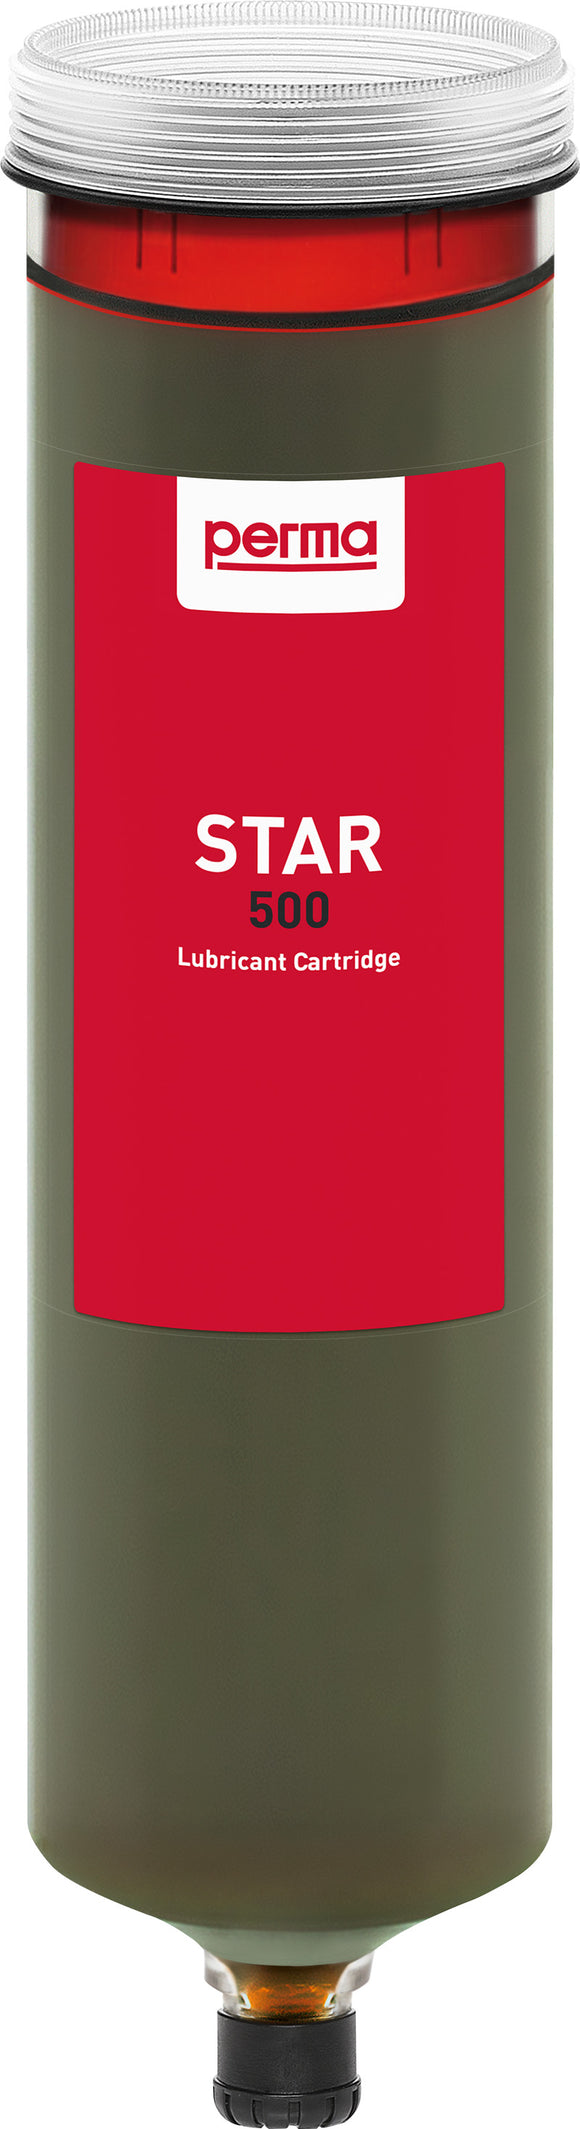 Perma Star LC 500 with Perma Liquid Grease SF06